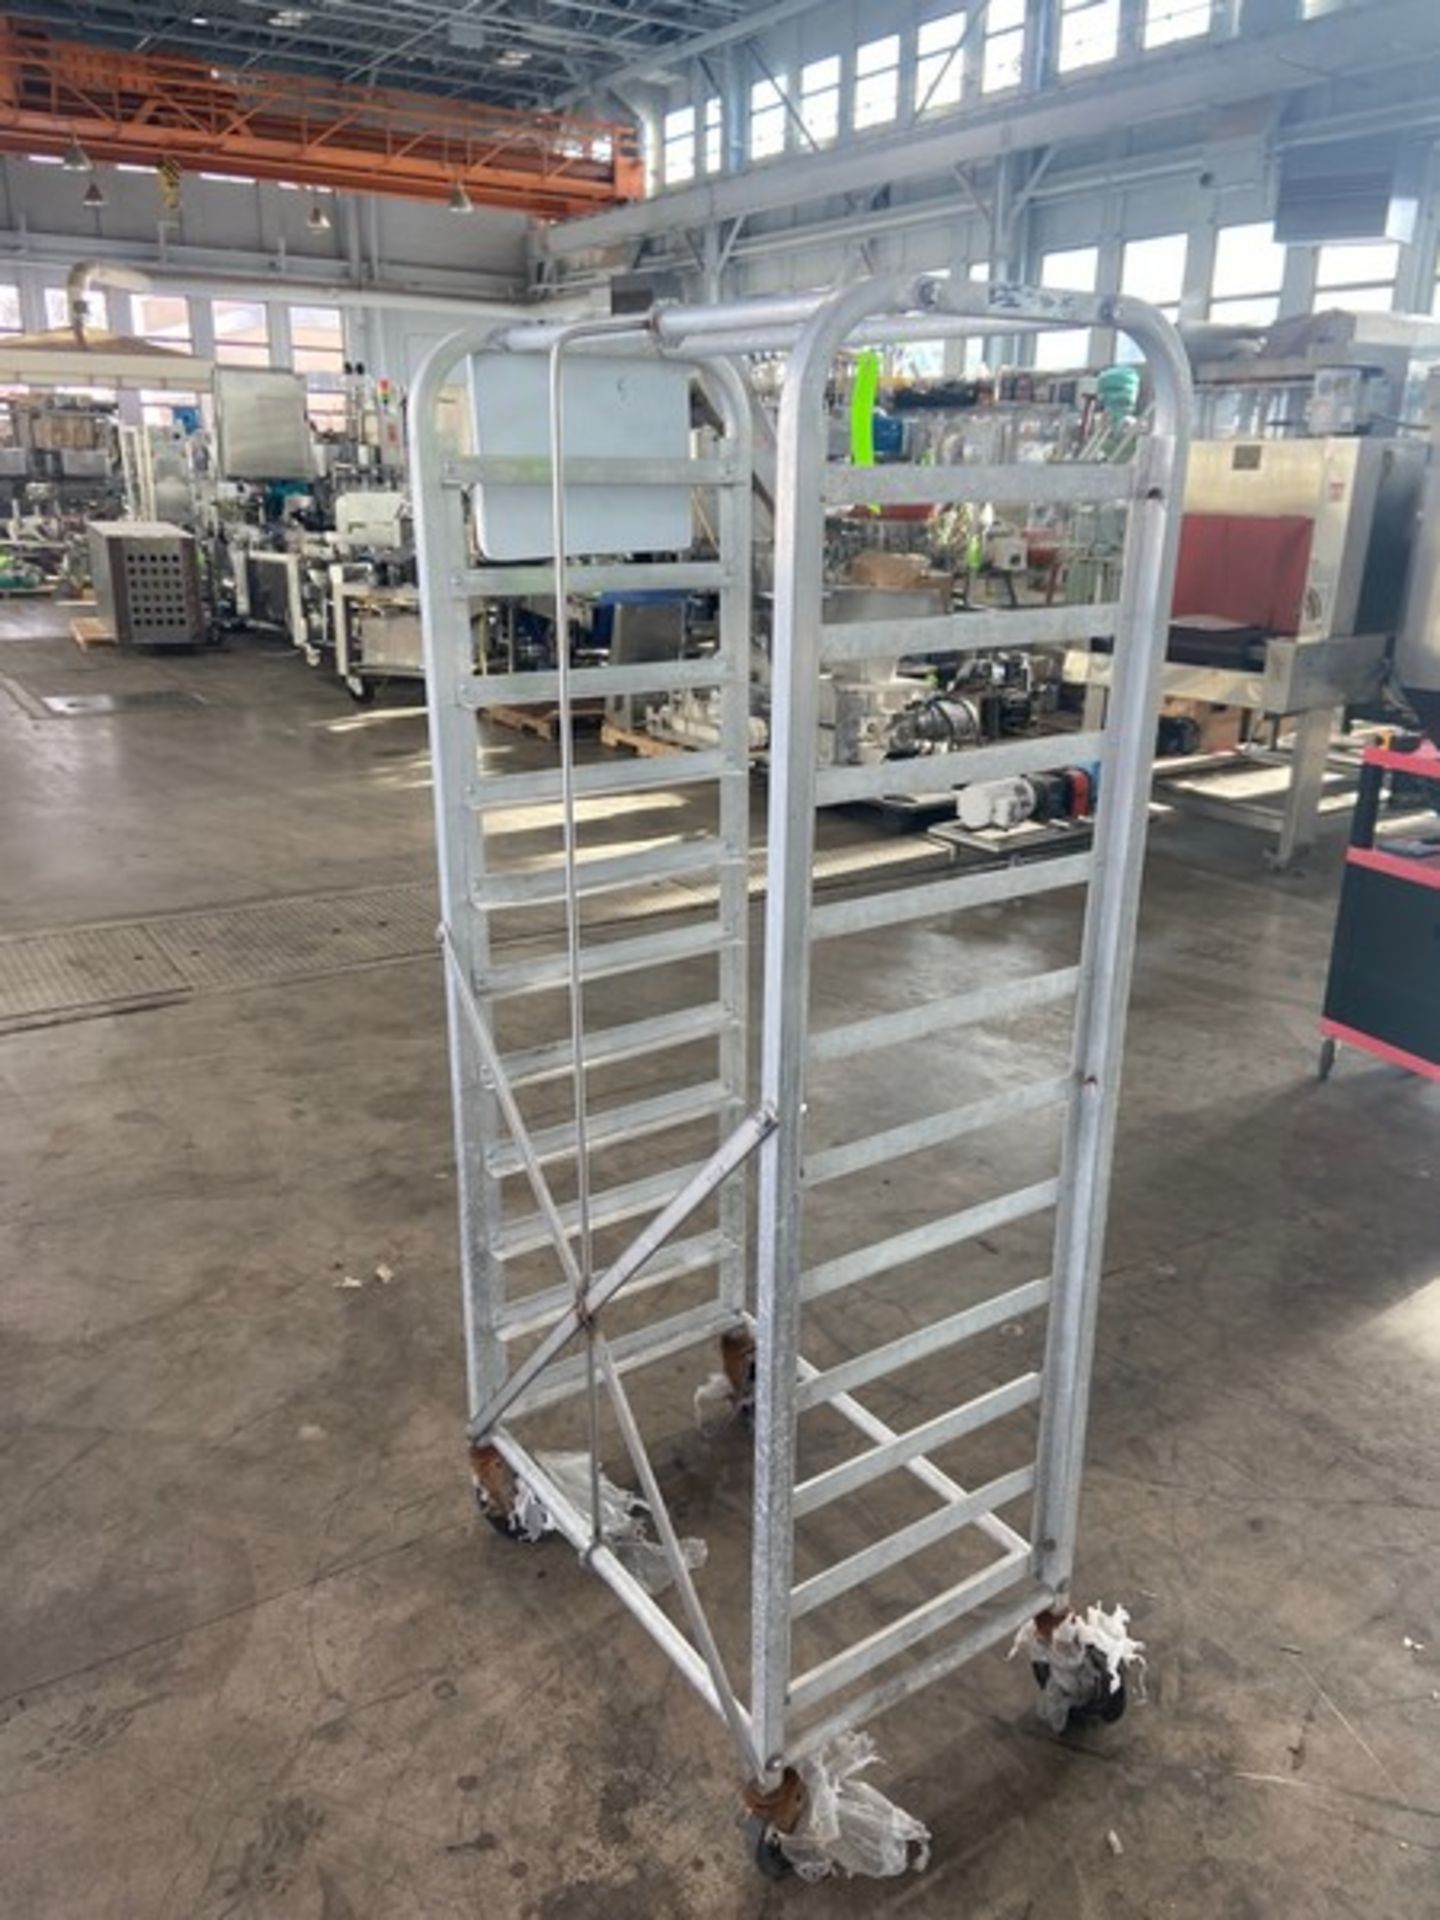 11-Slot Bakery Pan Rack,Mounted on (4) Casters (INV#88959) (Located @ the MDG Auction Showroom 2.0 - Image 3 of 3